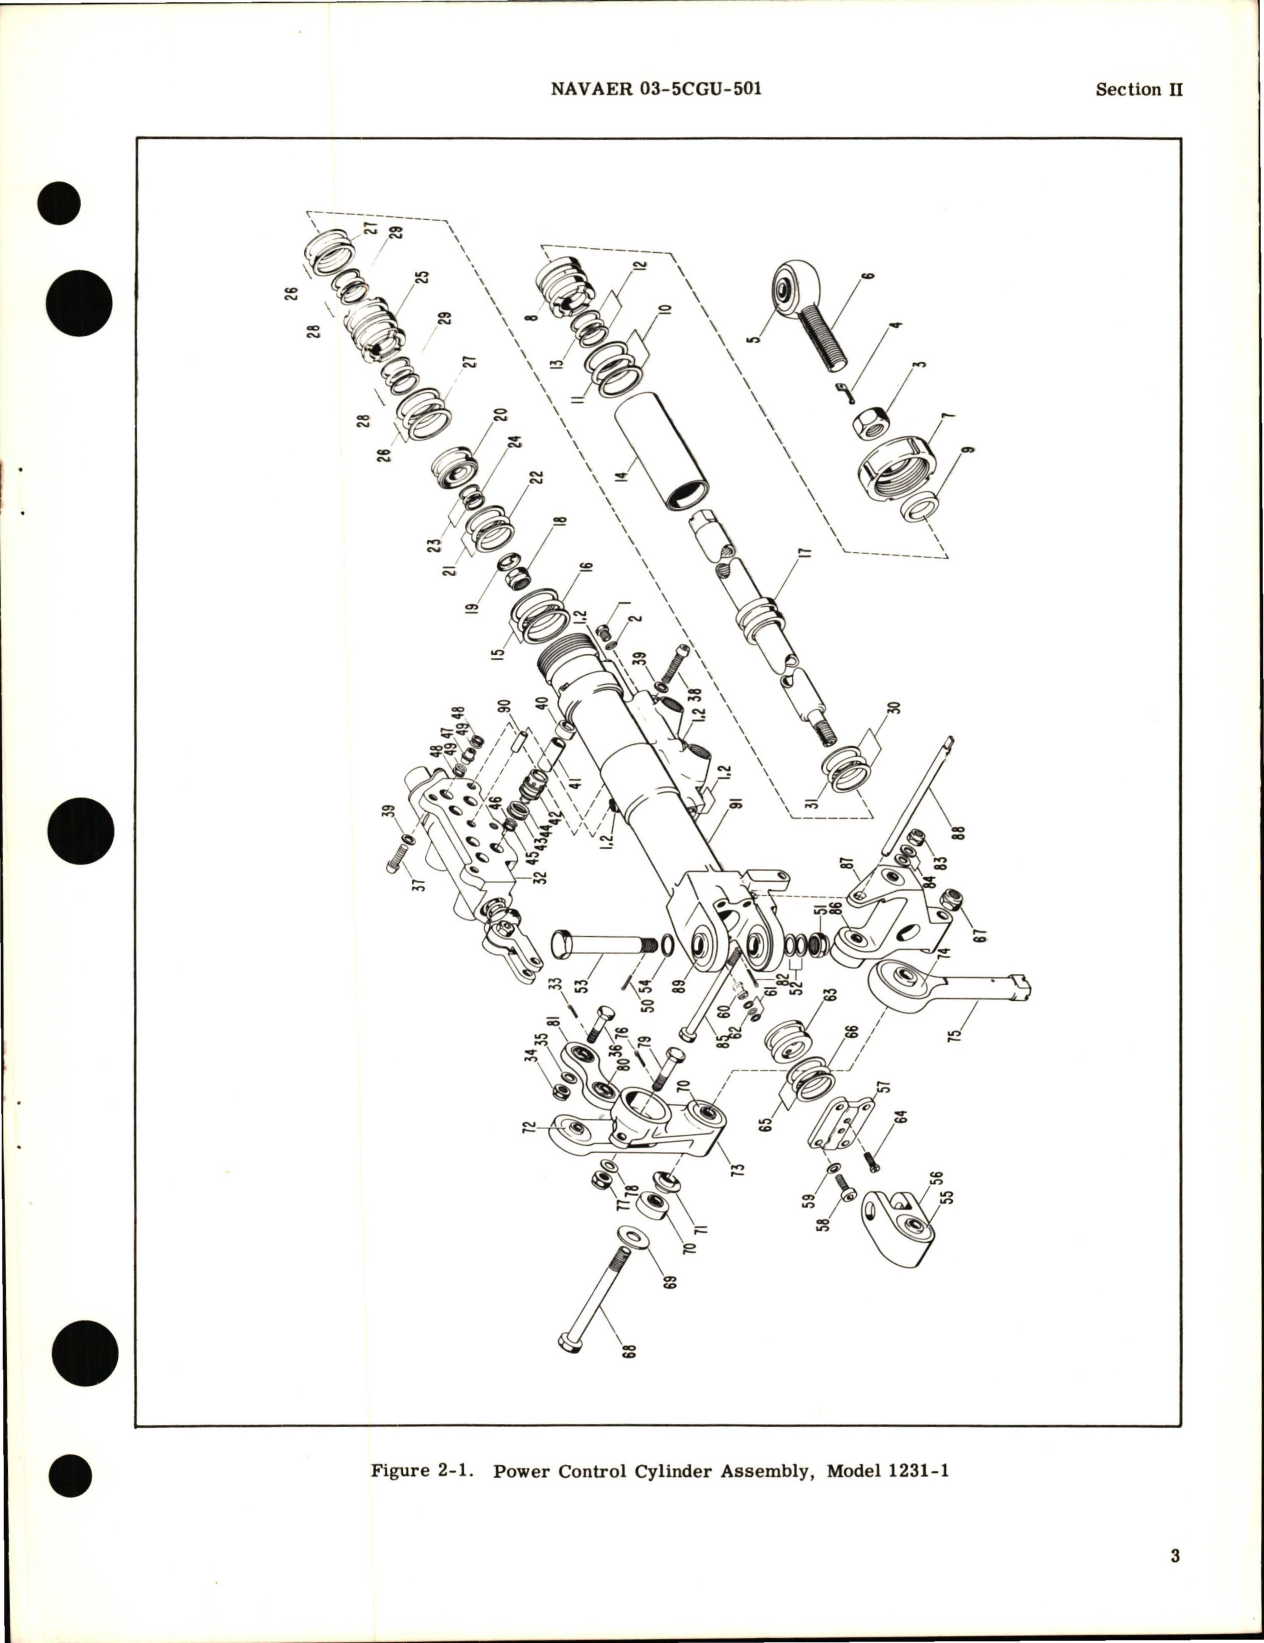 Sample page 5 from AirCorps Library document: Overhaul Instructions for Power Control Cylinder Assembly - Part 120300 and 123101 